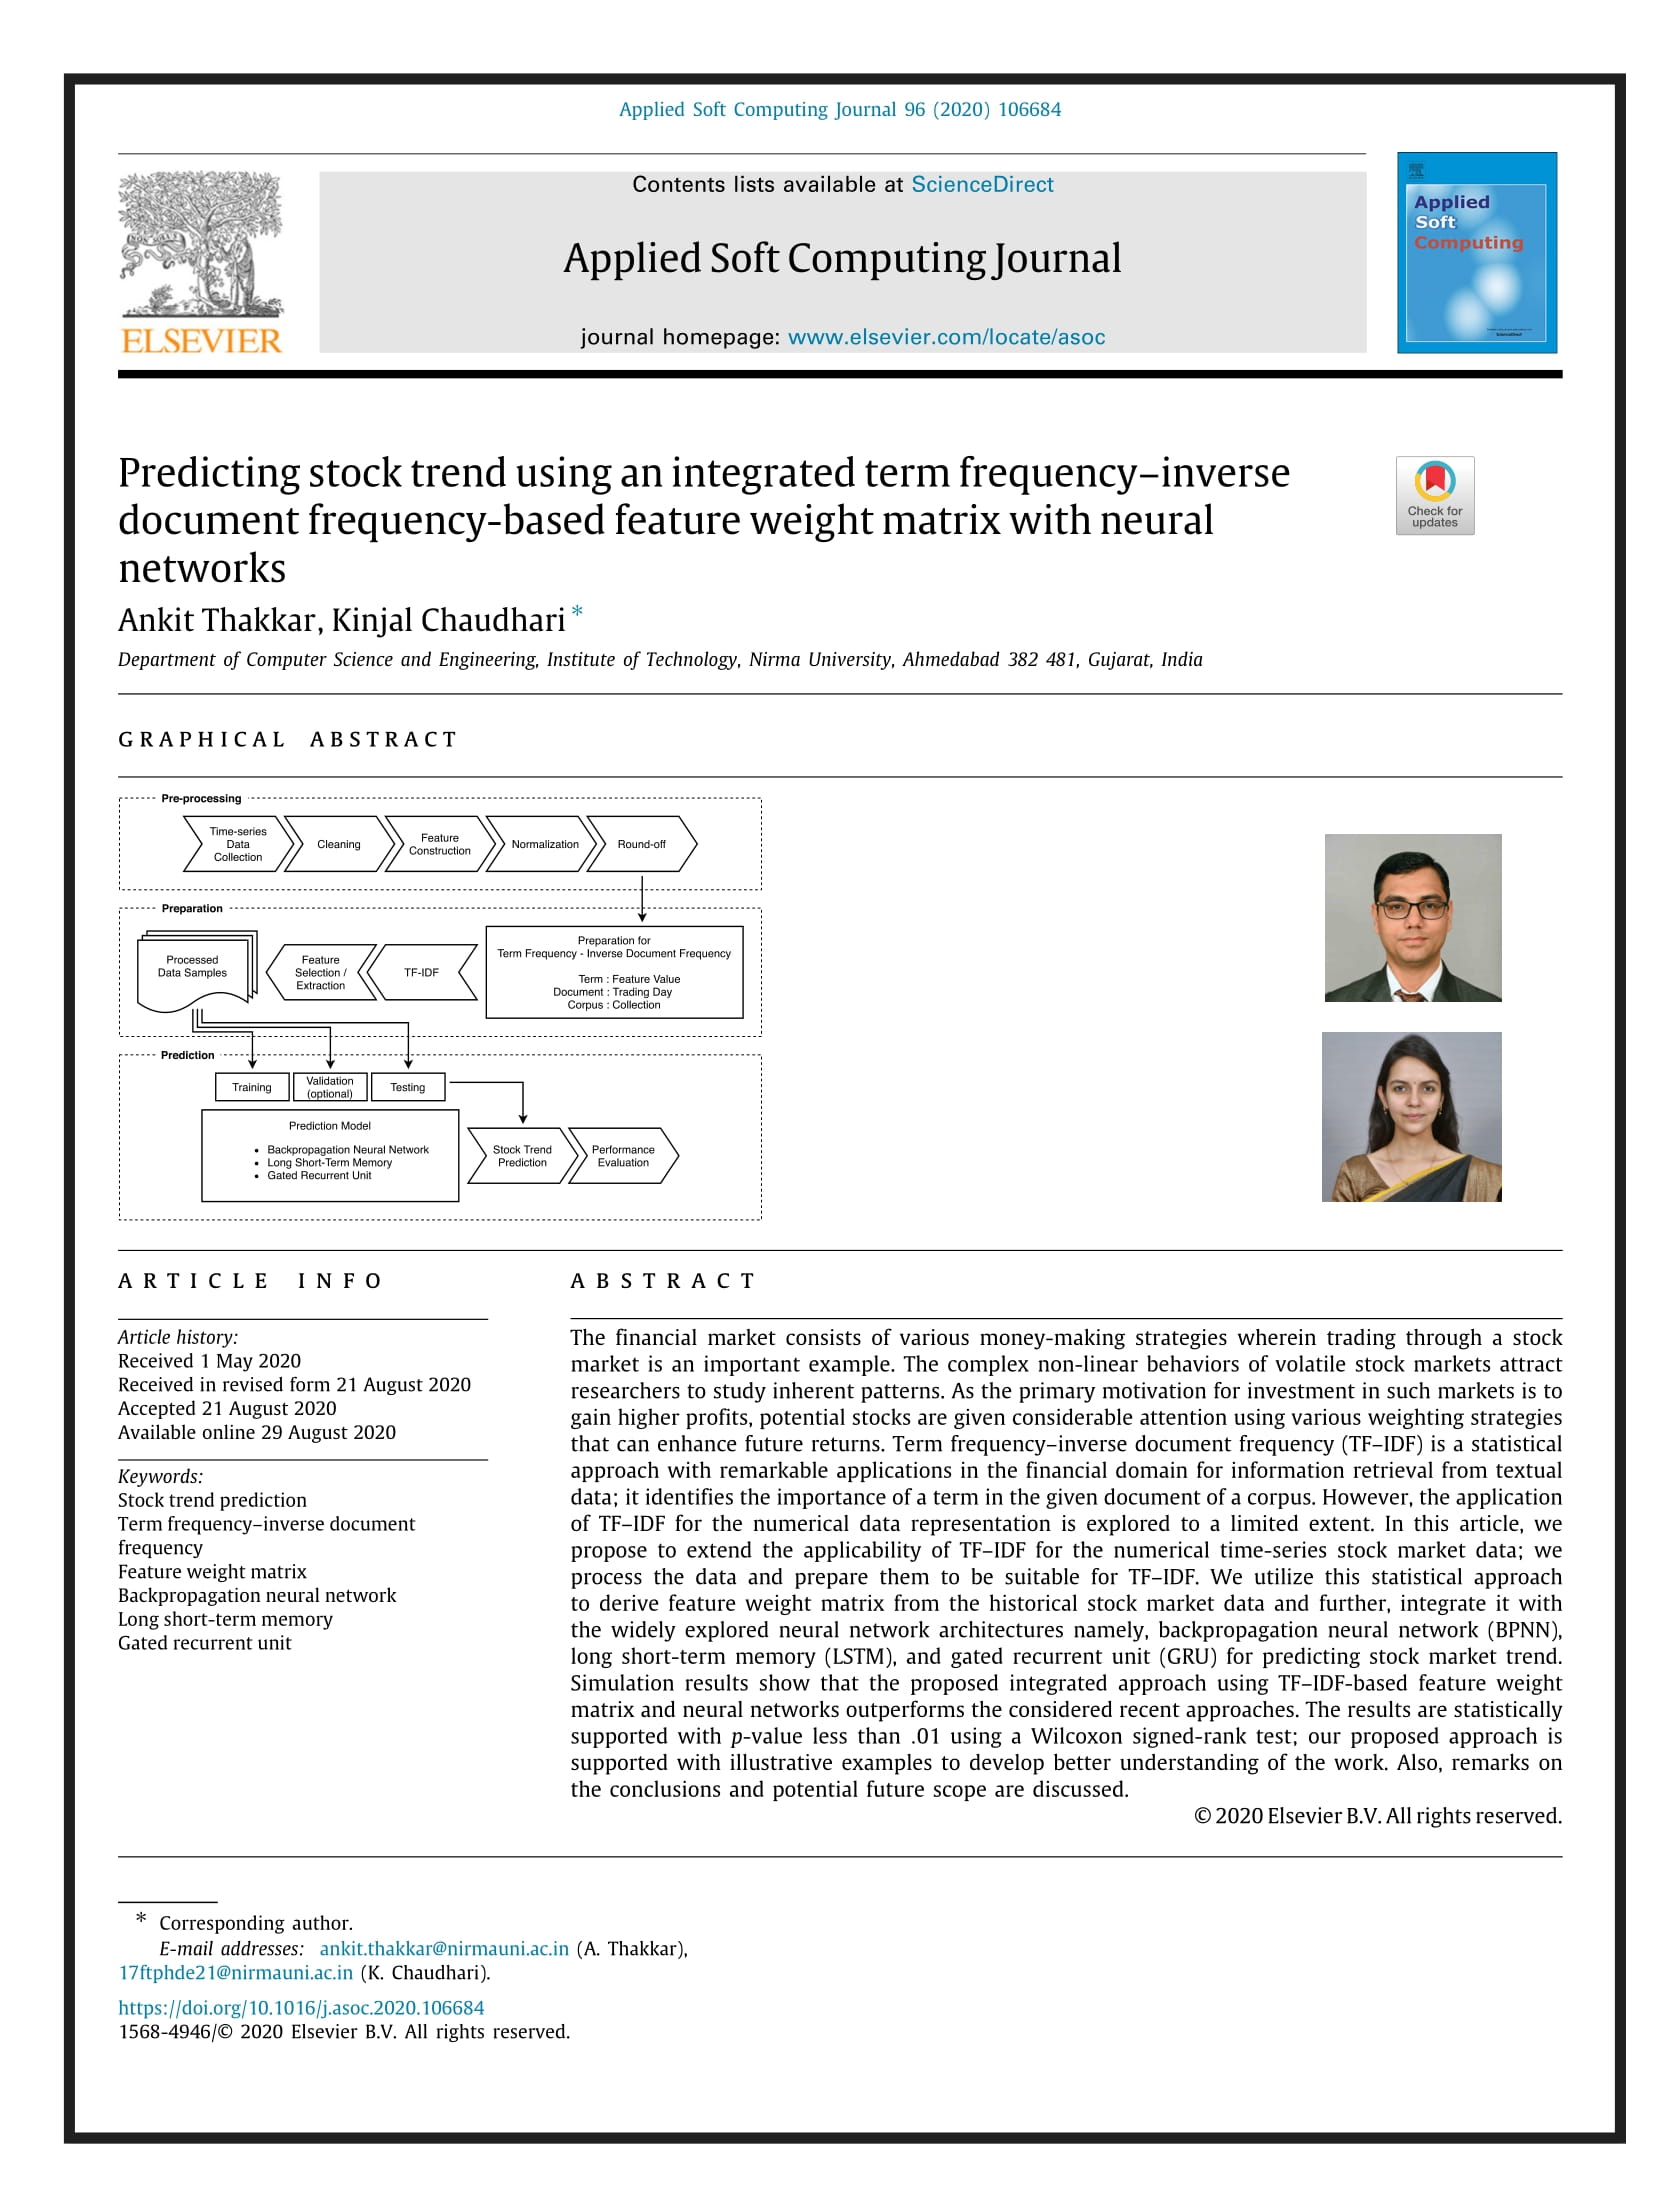 Predicting stock trend using an integrated term frequency?inverse document frequency-based feature weight matrix with neural networks